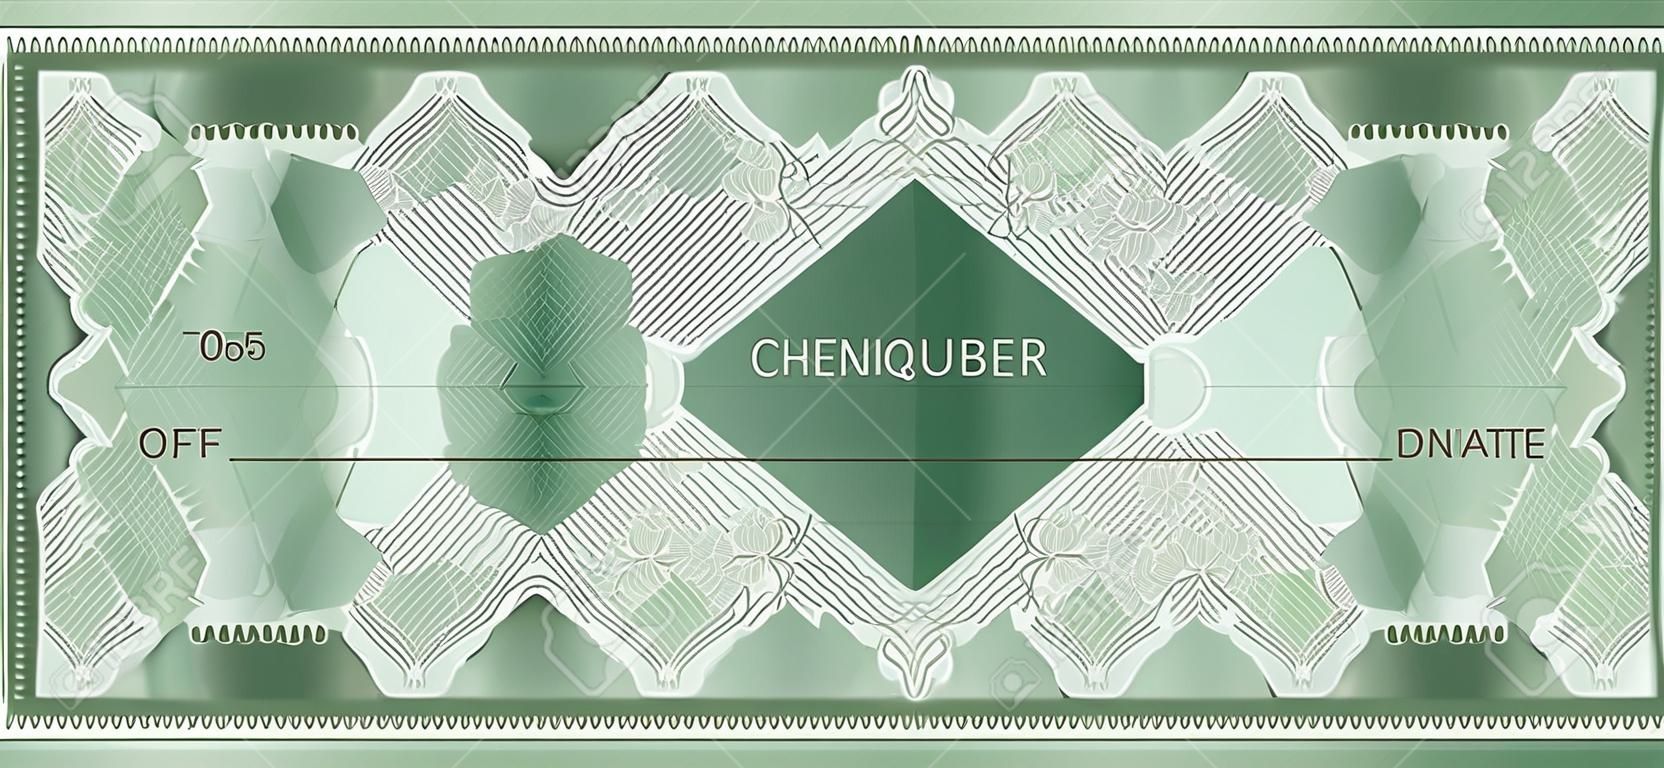 Check, Cheque (Chequebook template). Guilloche pattern with abstract floral watermark, border. Green background for banknote, money design, currency, bank note, Voucher, Gift certificate, Money coupon